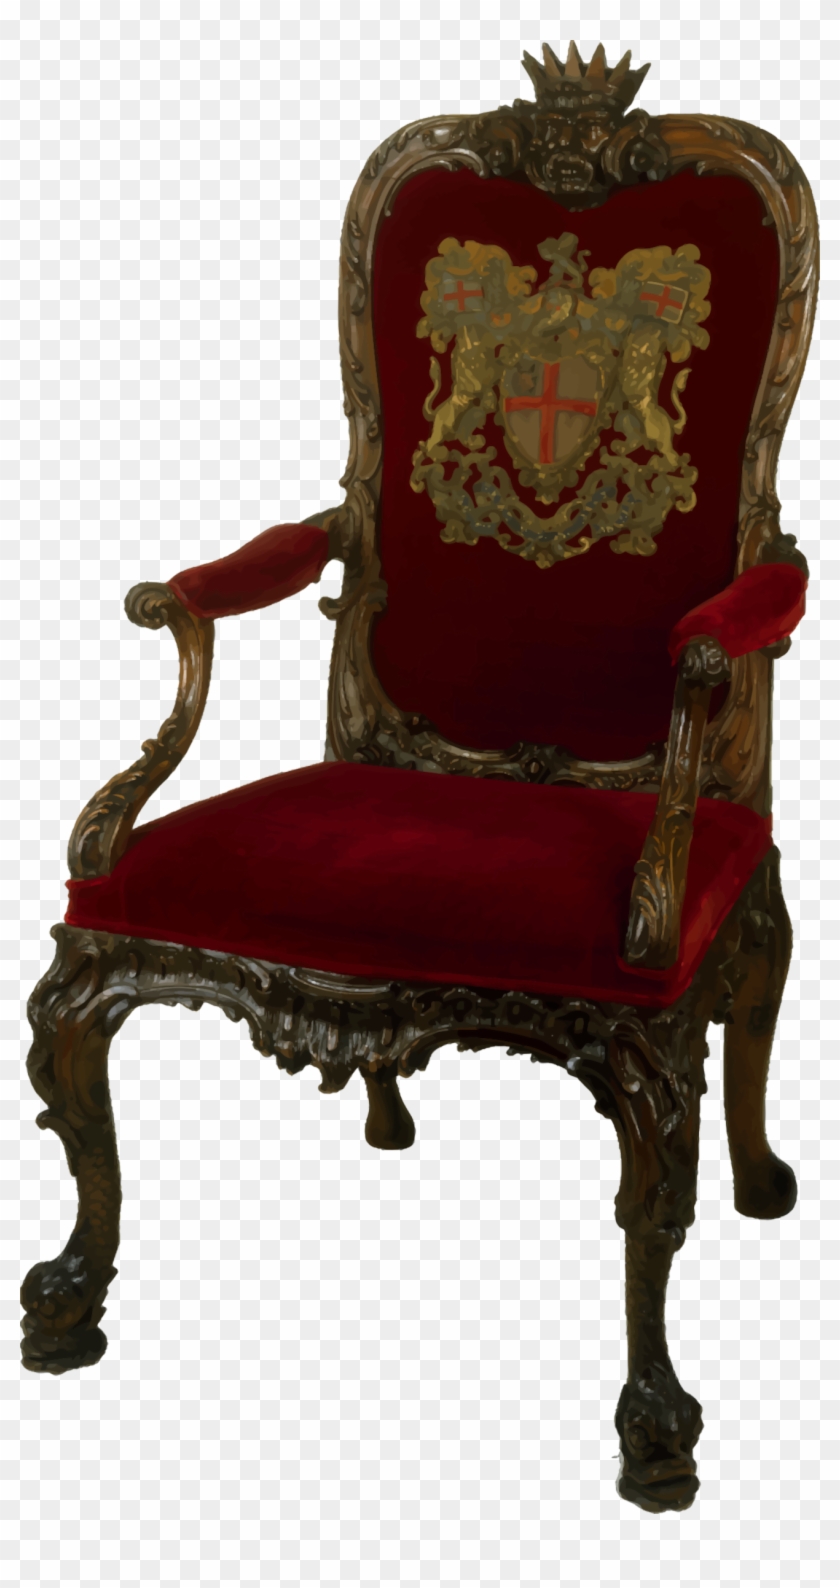 This Free Icons Png Design Of Ornate Walnut Chair Clipart